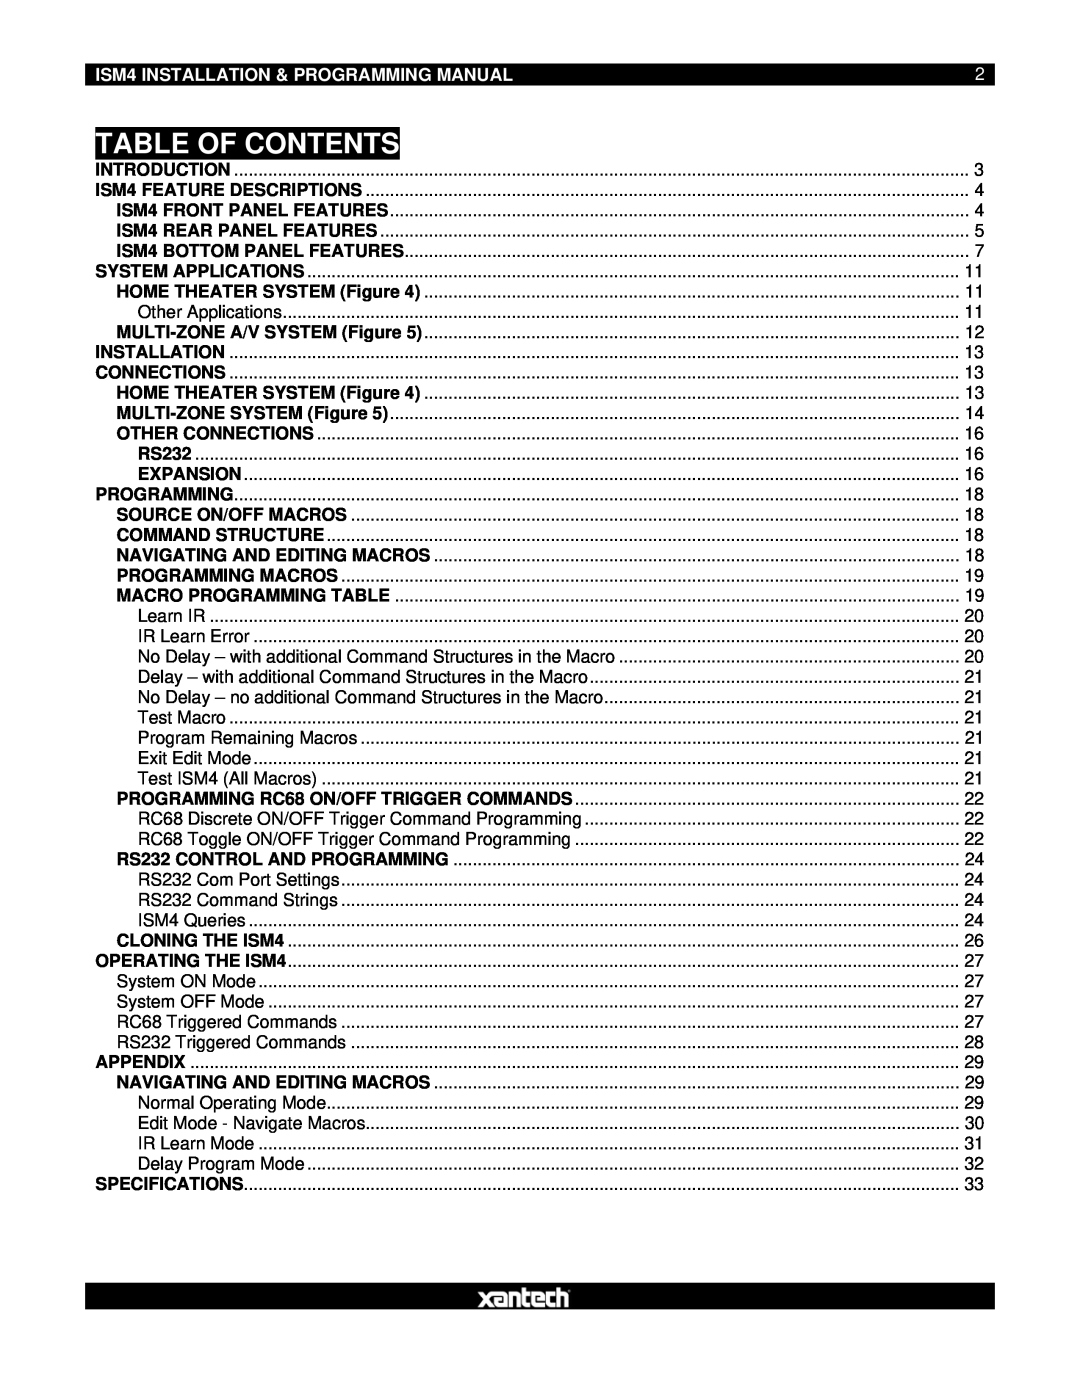 Xantech manual Table Of Contents, ISM4 INSTALLATION & PROGRAMMING MANUAL 